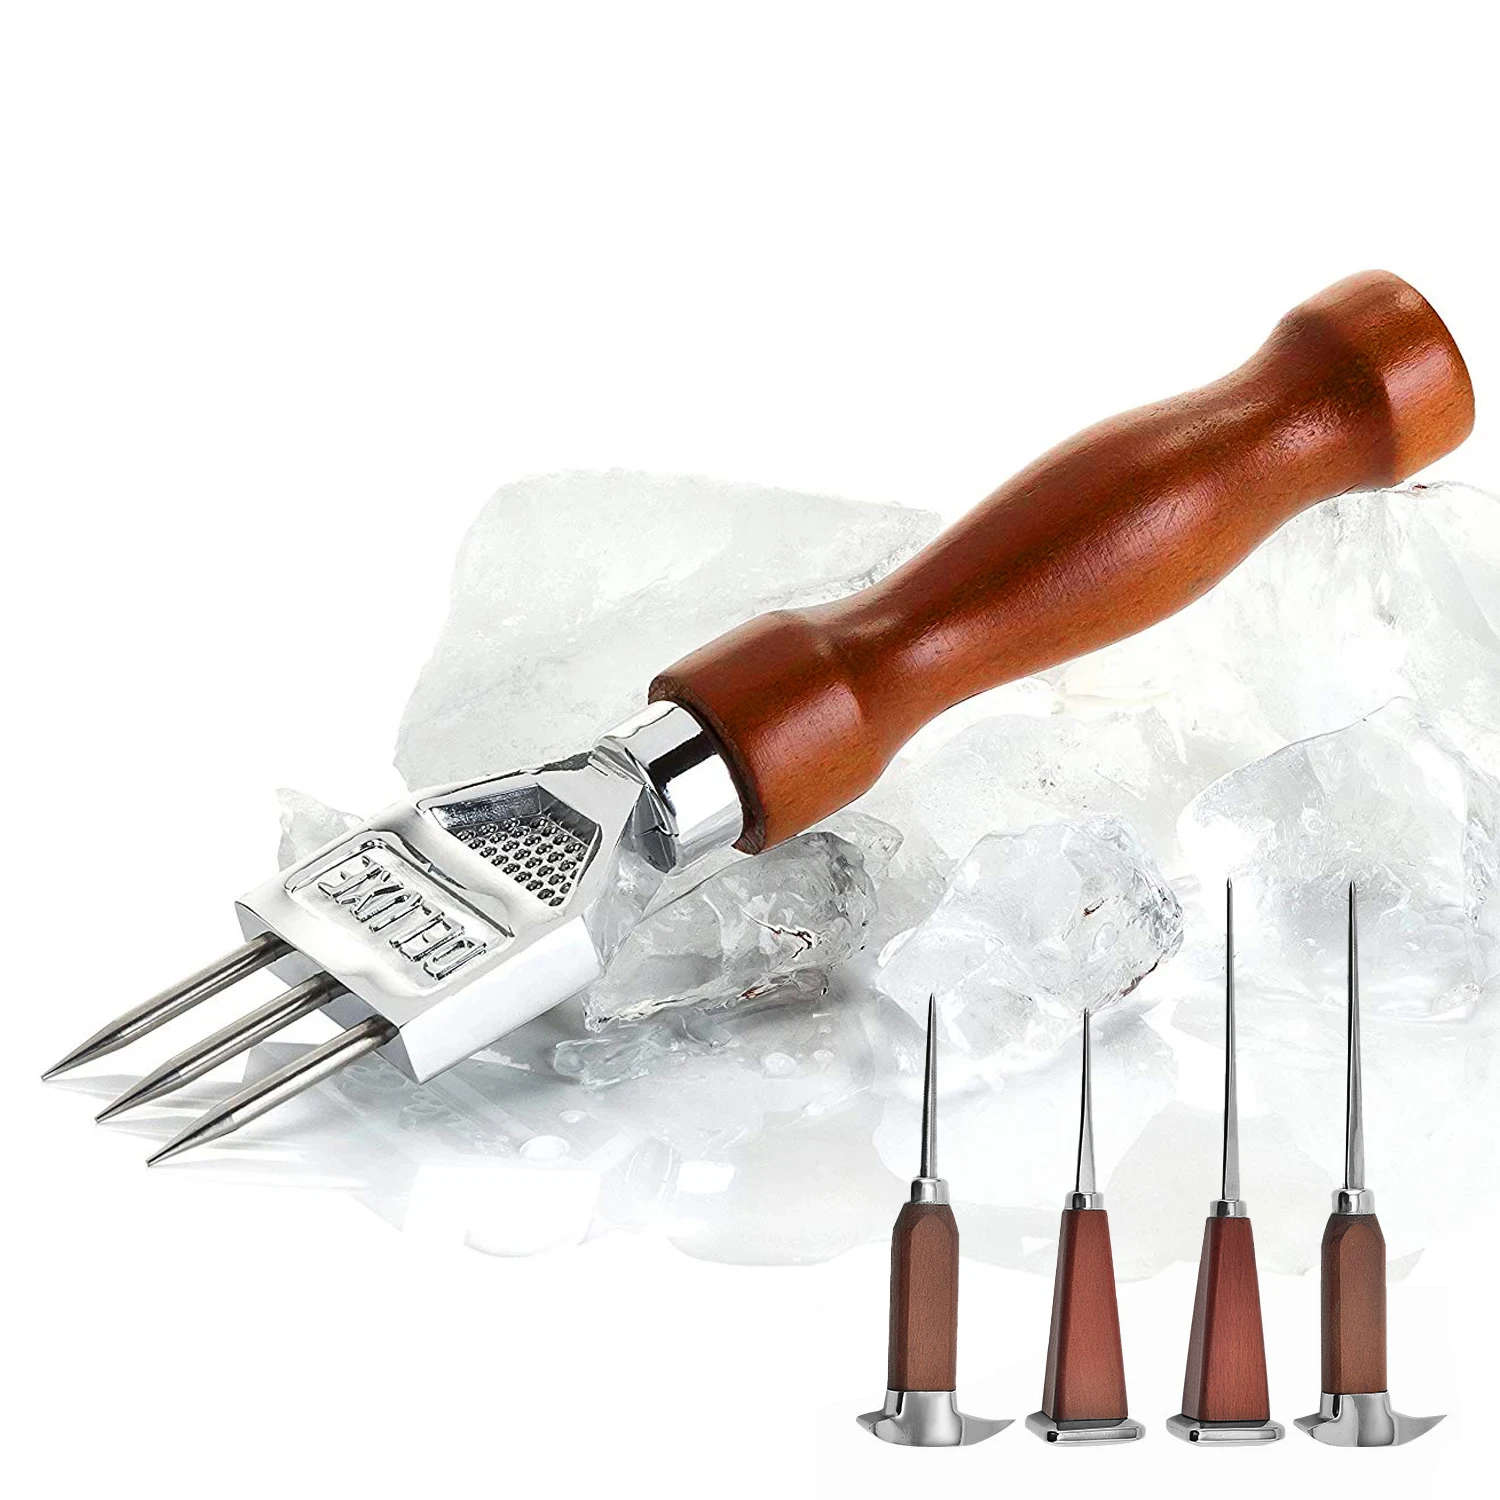 Ice Pick - Sturdy Ice Chipper With Solid Wood Handle, 304 Stainless Steel Three Pronged Ice Crusher for Cocktail Bartender